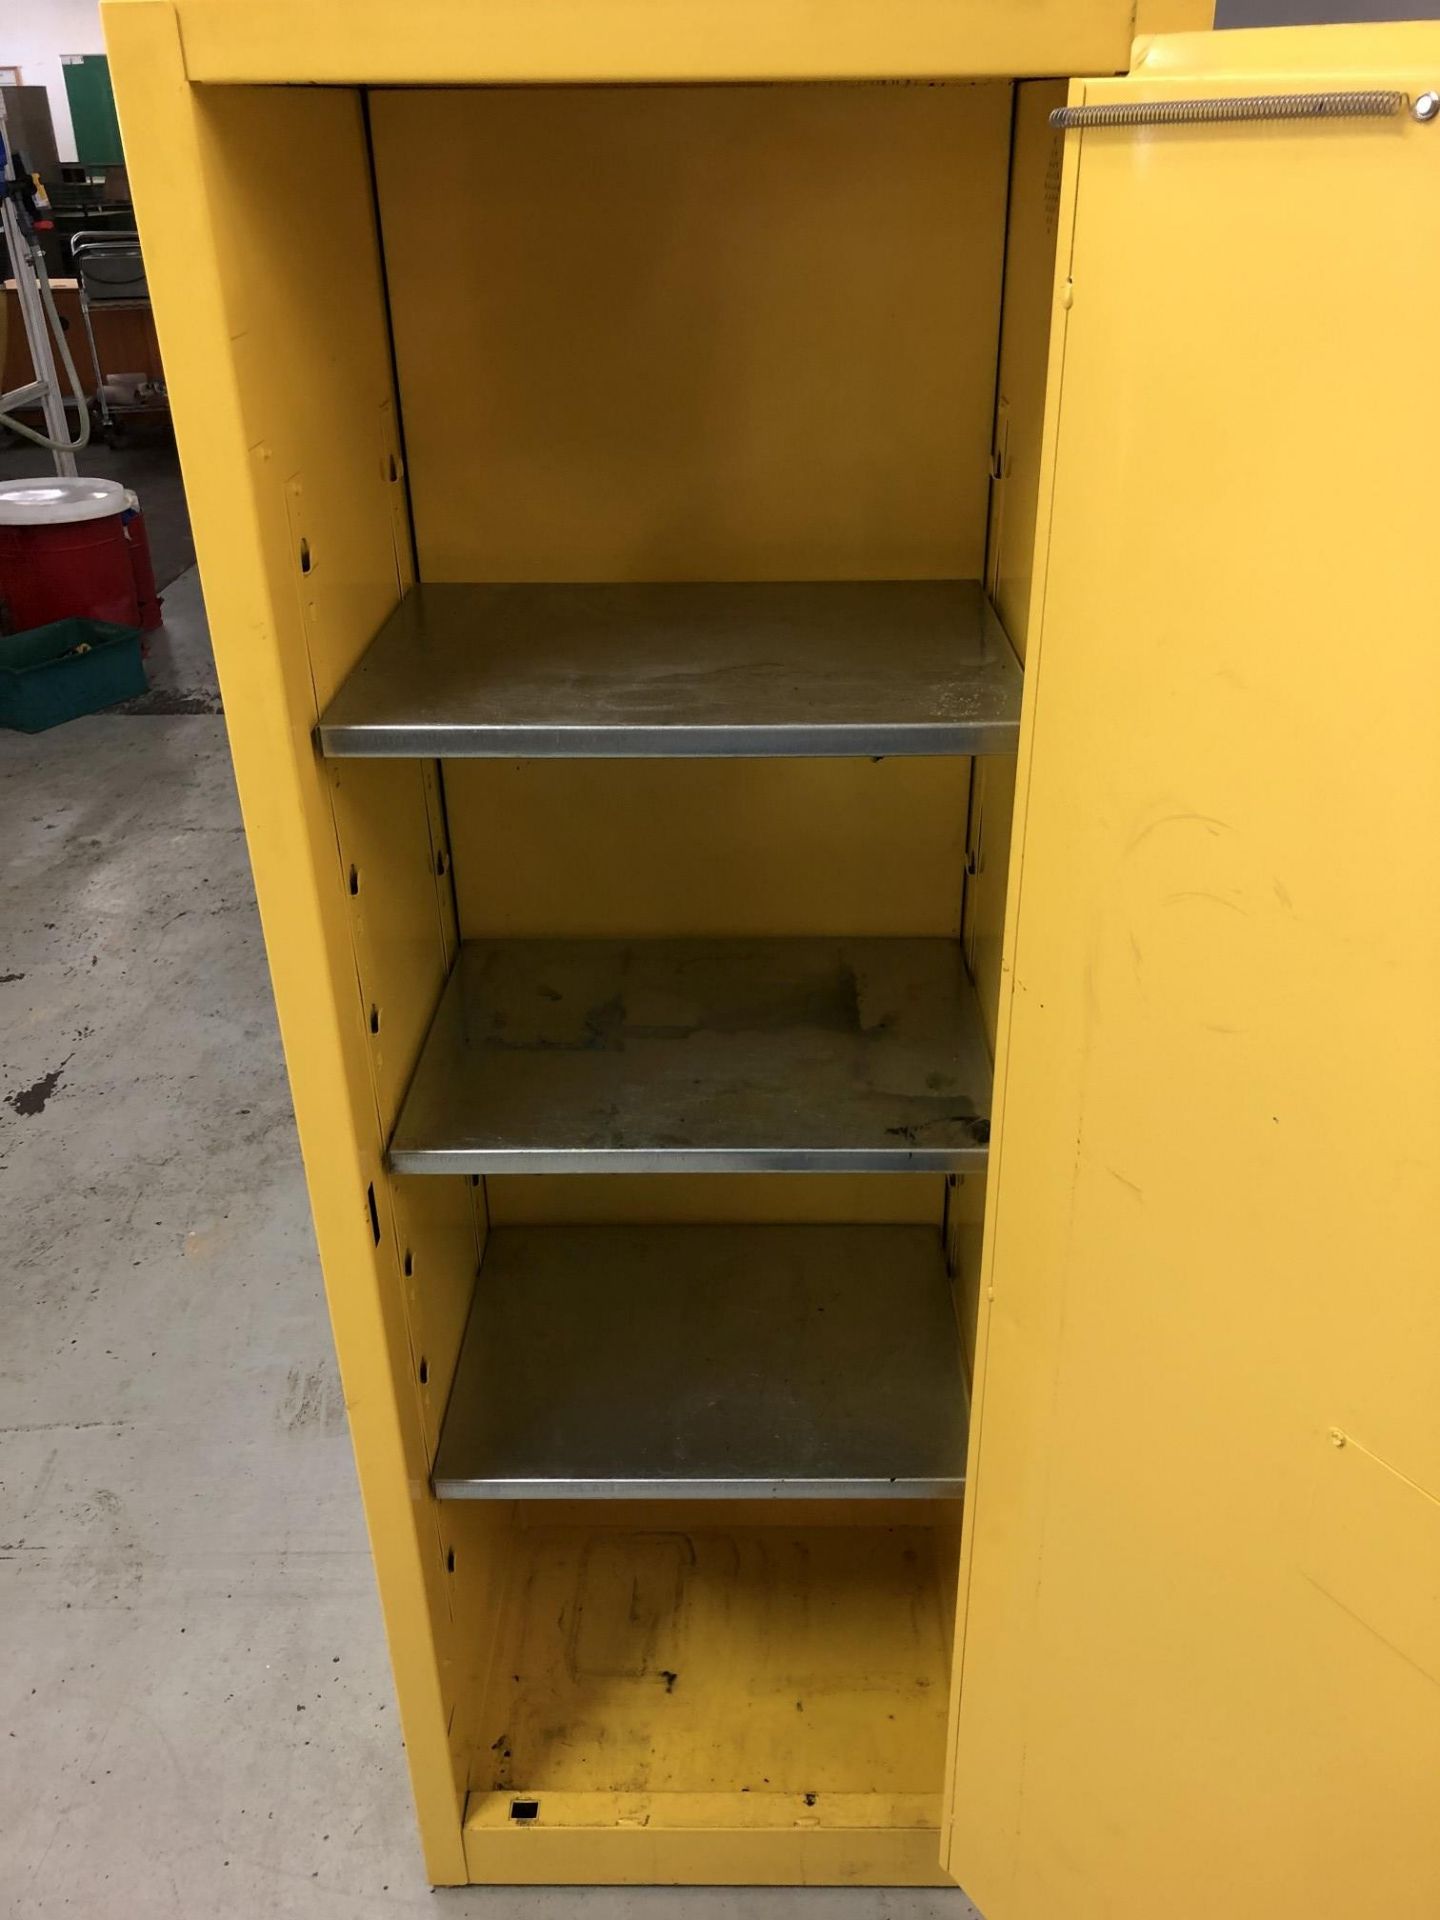 Eagle Safety Storage Cabinet (23-1/4" W x 18-1/2" D x 65-1/2" H) - Image 3 of 4